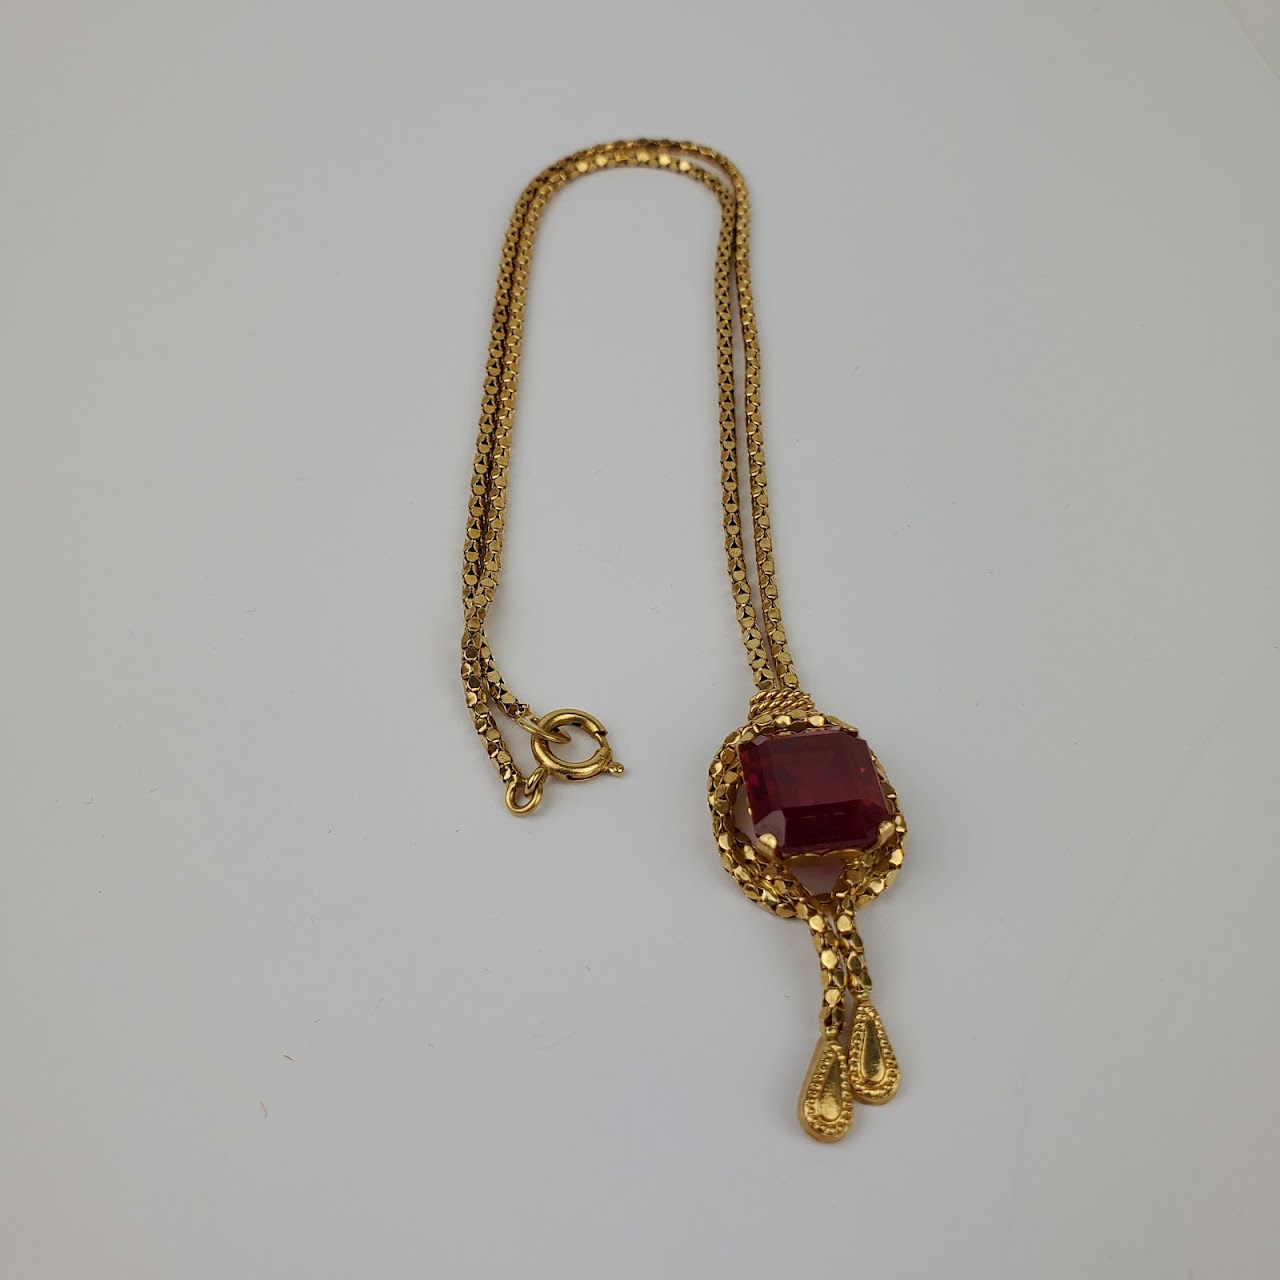 18K Gold and Red Gemstone Pendant Necklace